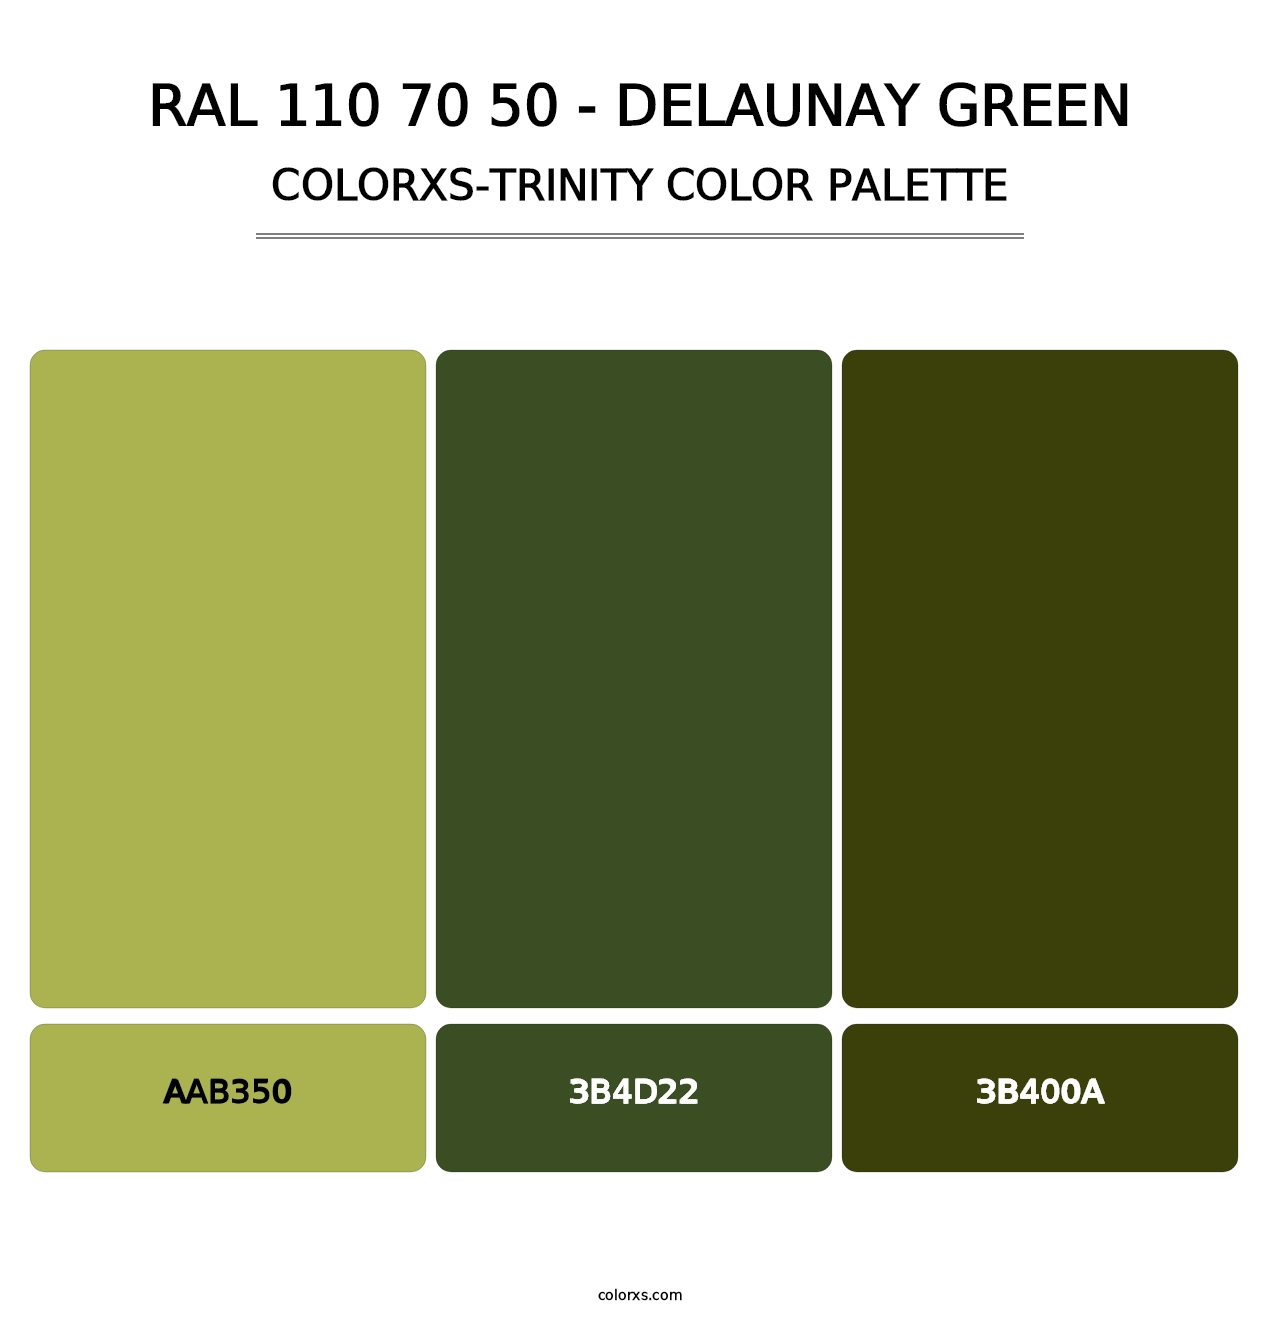 RAL 110 70 50 - Delaunay Green - Colorxs Trinity Palette